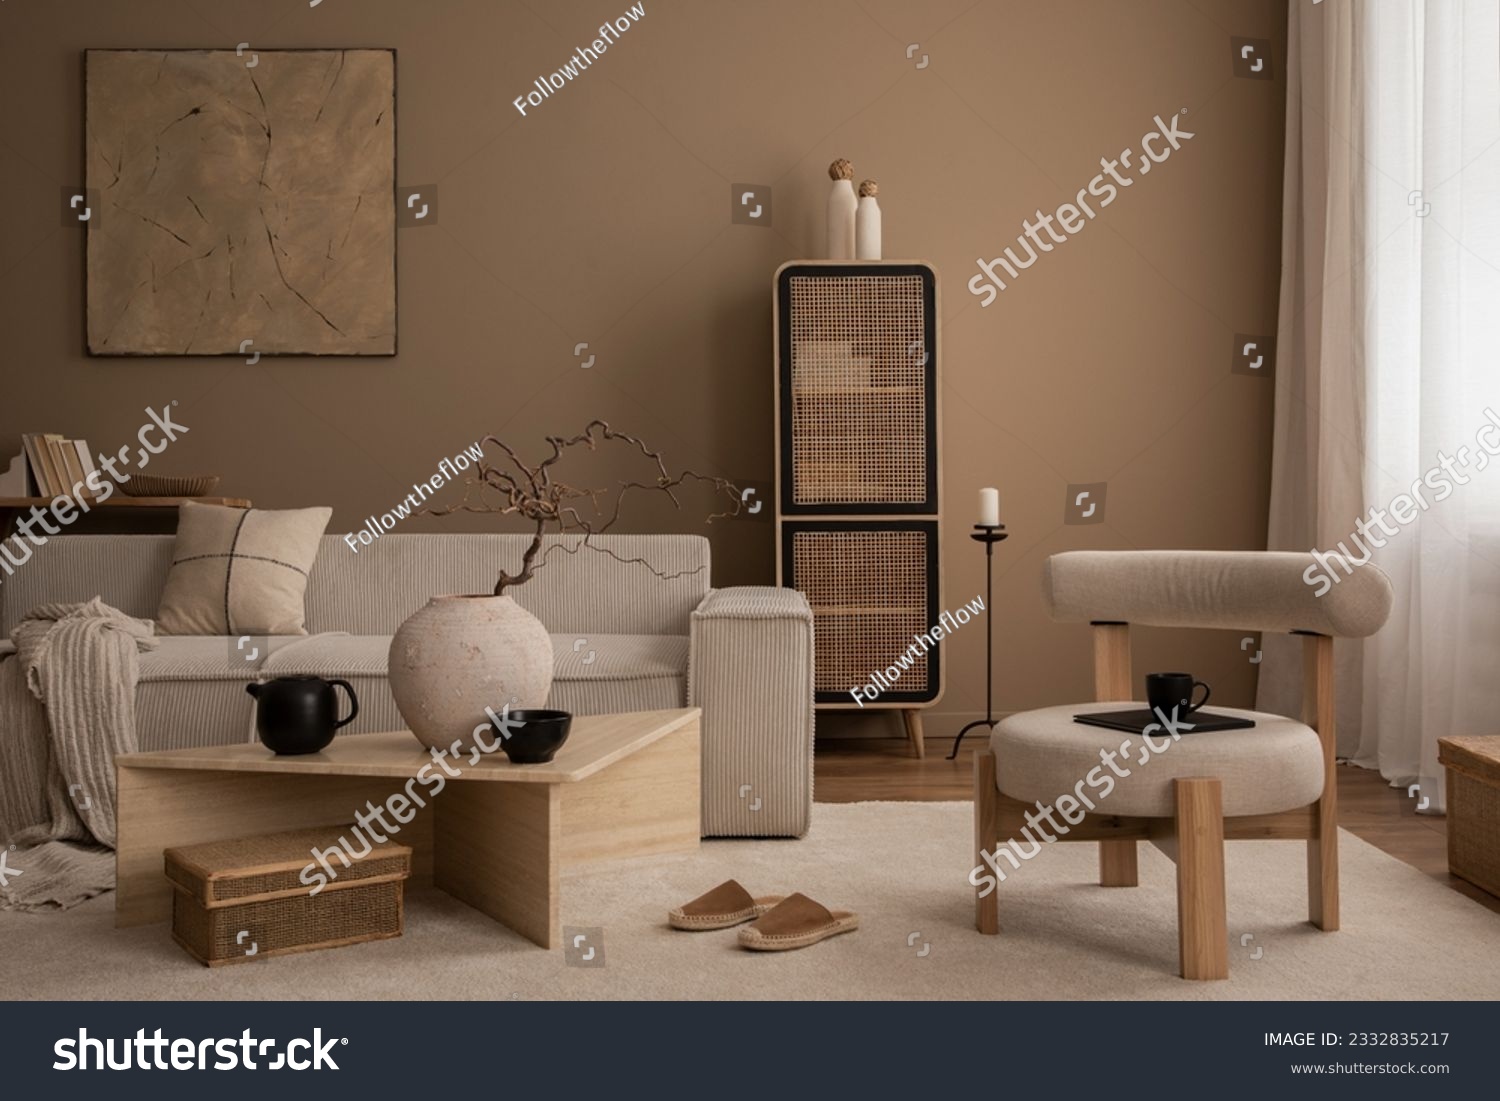 Elegant composition of warm living room interior with mock up poster frame, modular sofa, travertine coffee table, gray armchair, rattan sideboard, lamp and personal accessories. Home decor. Template. #2332835217